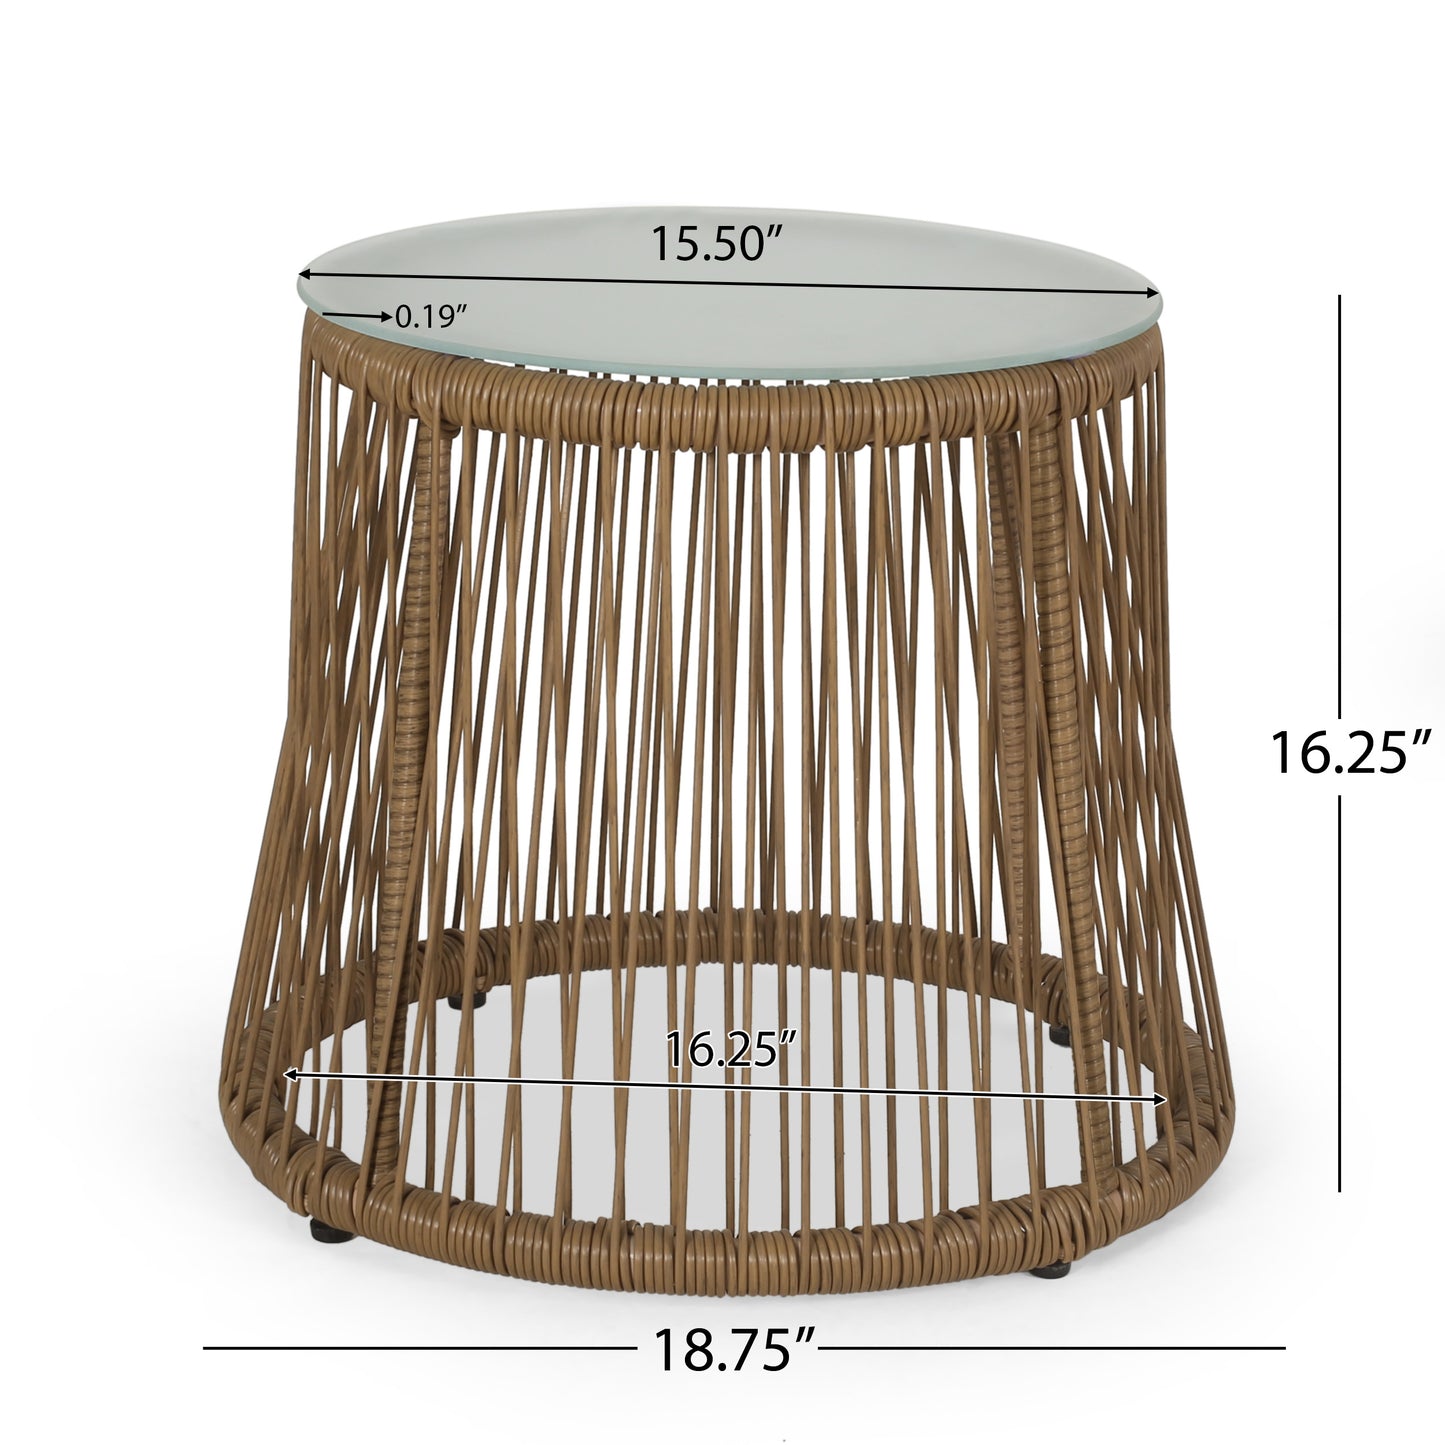 Helmville Outdoor Wicker Side Table with Glass Top, Light Brown